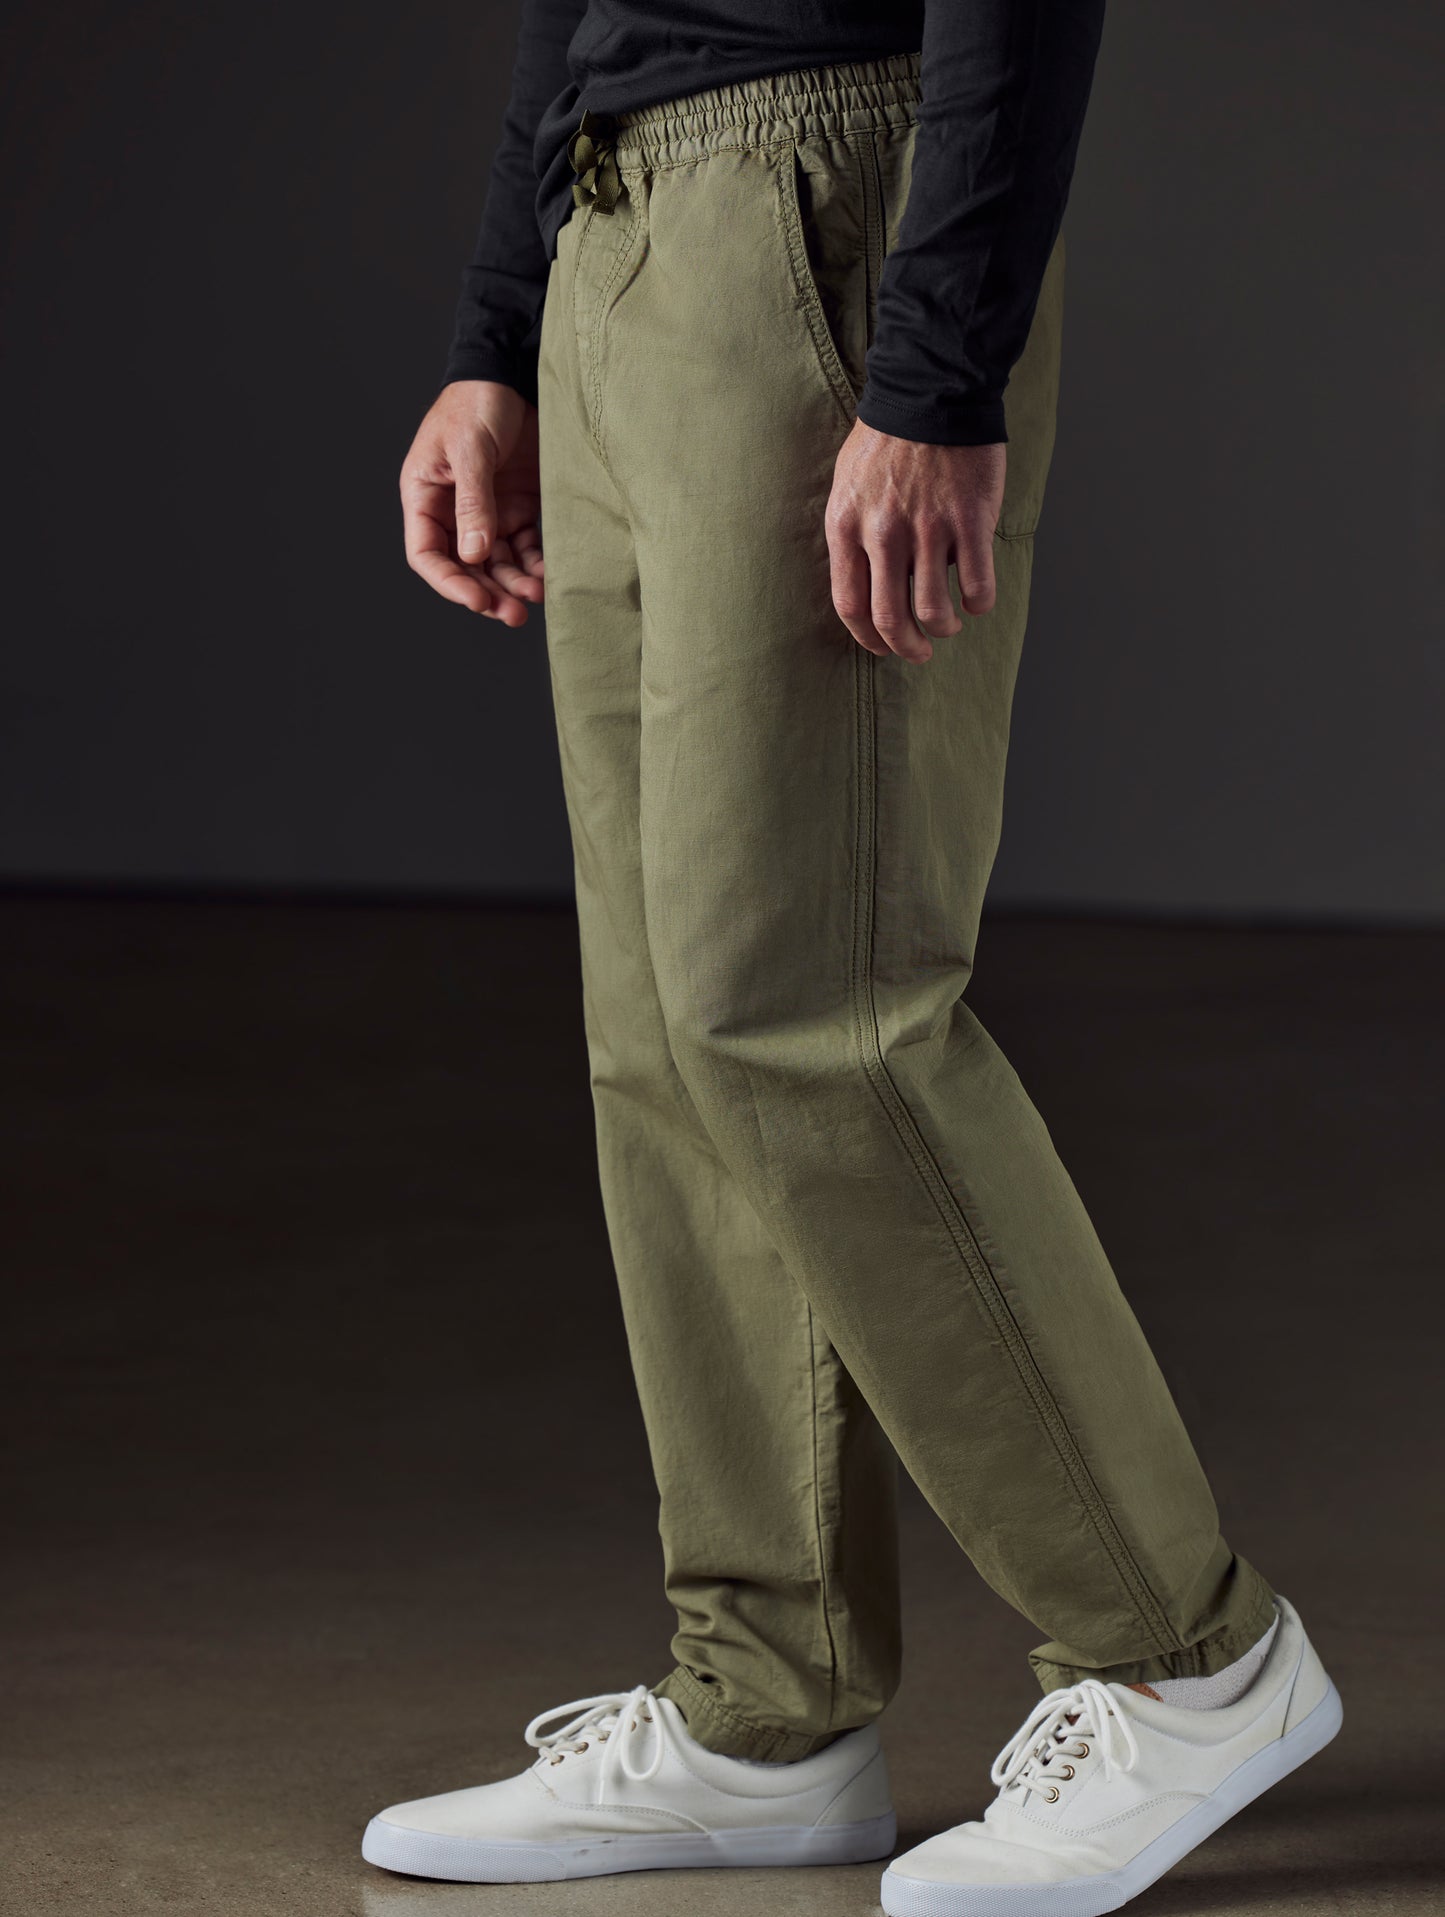 green fatigue pant from AETHER Apparel